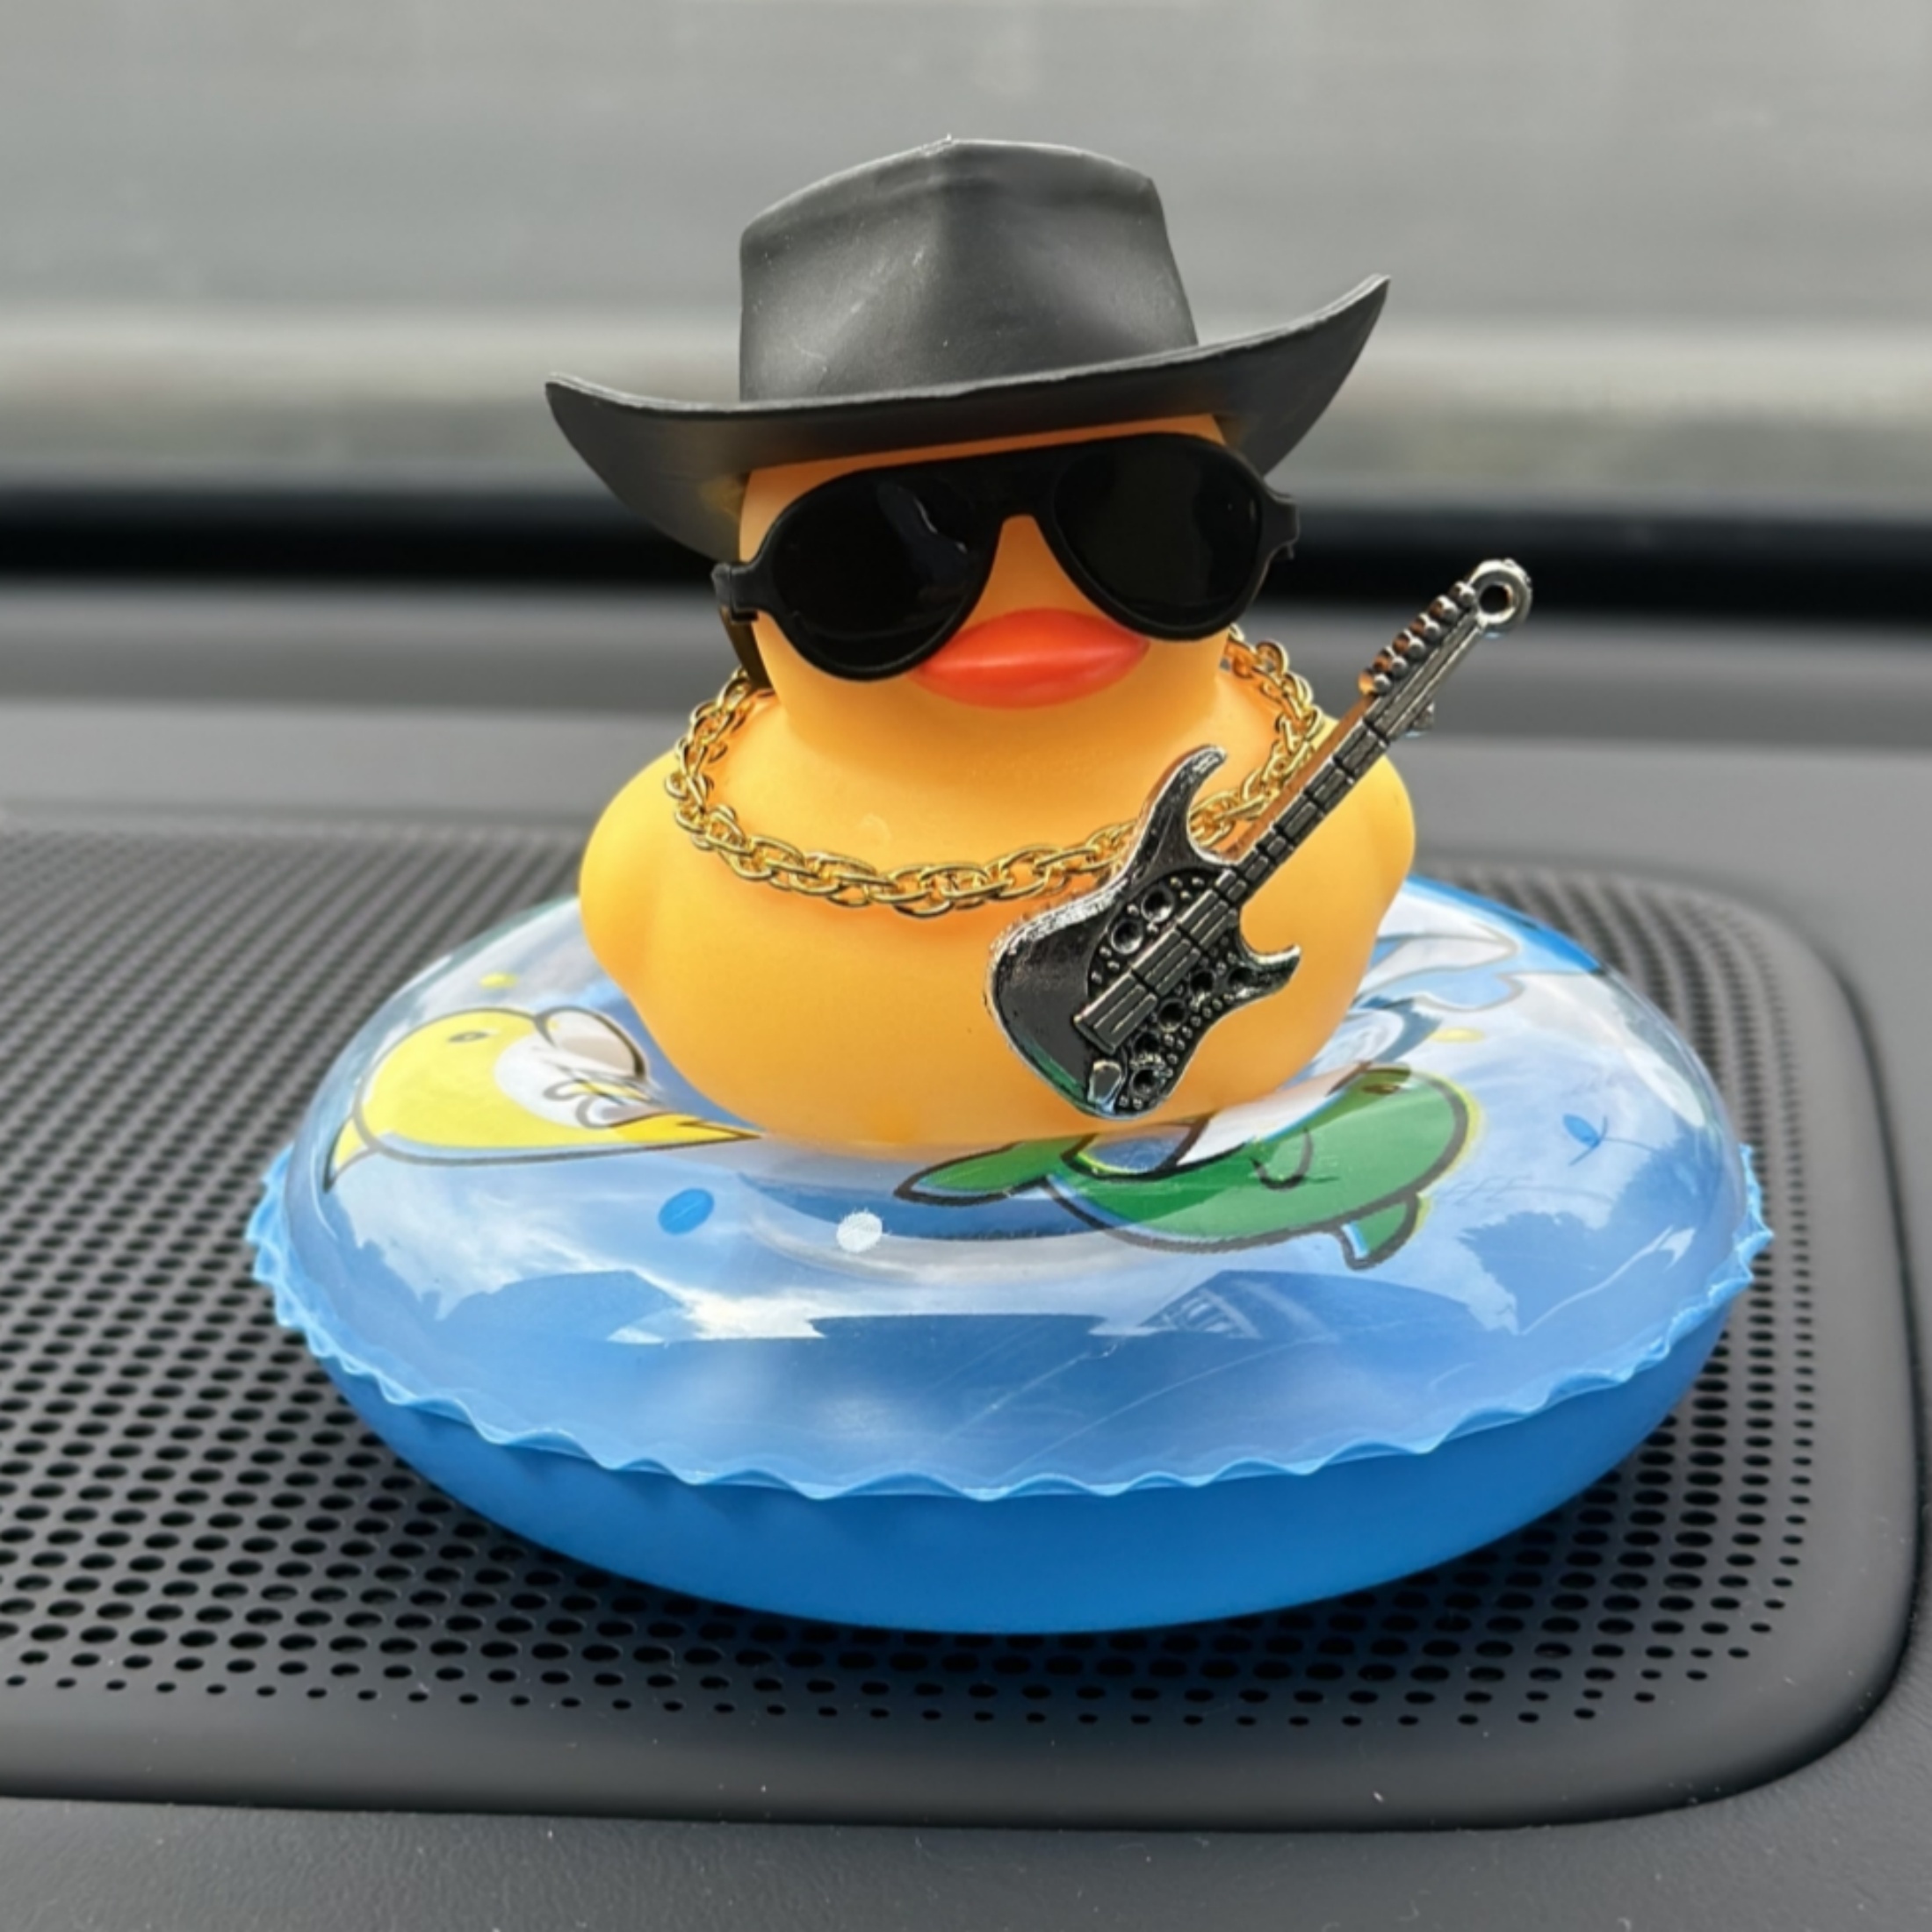 

1pc Rubber Duck With Swimming Ring, Necklace & Fashion Glasses - Perfect For Car Dashboard Decor, Home Accent, Christmas/halloween Gift